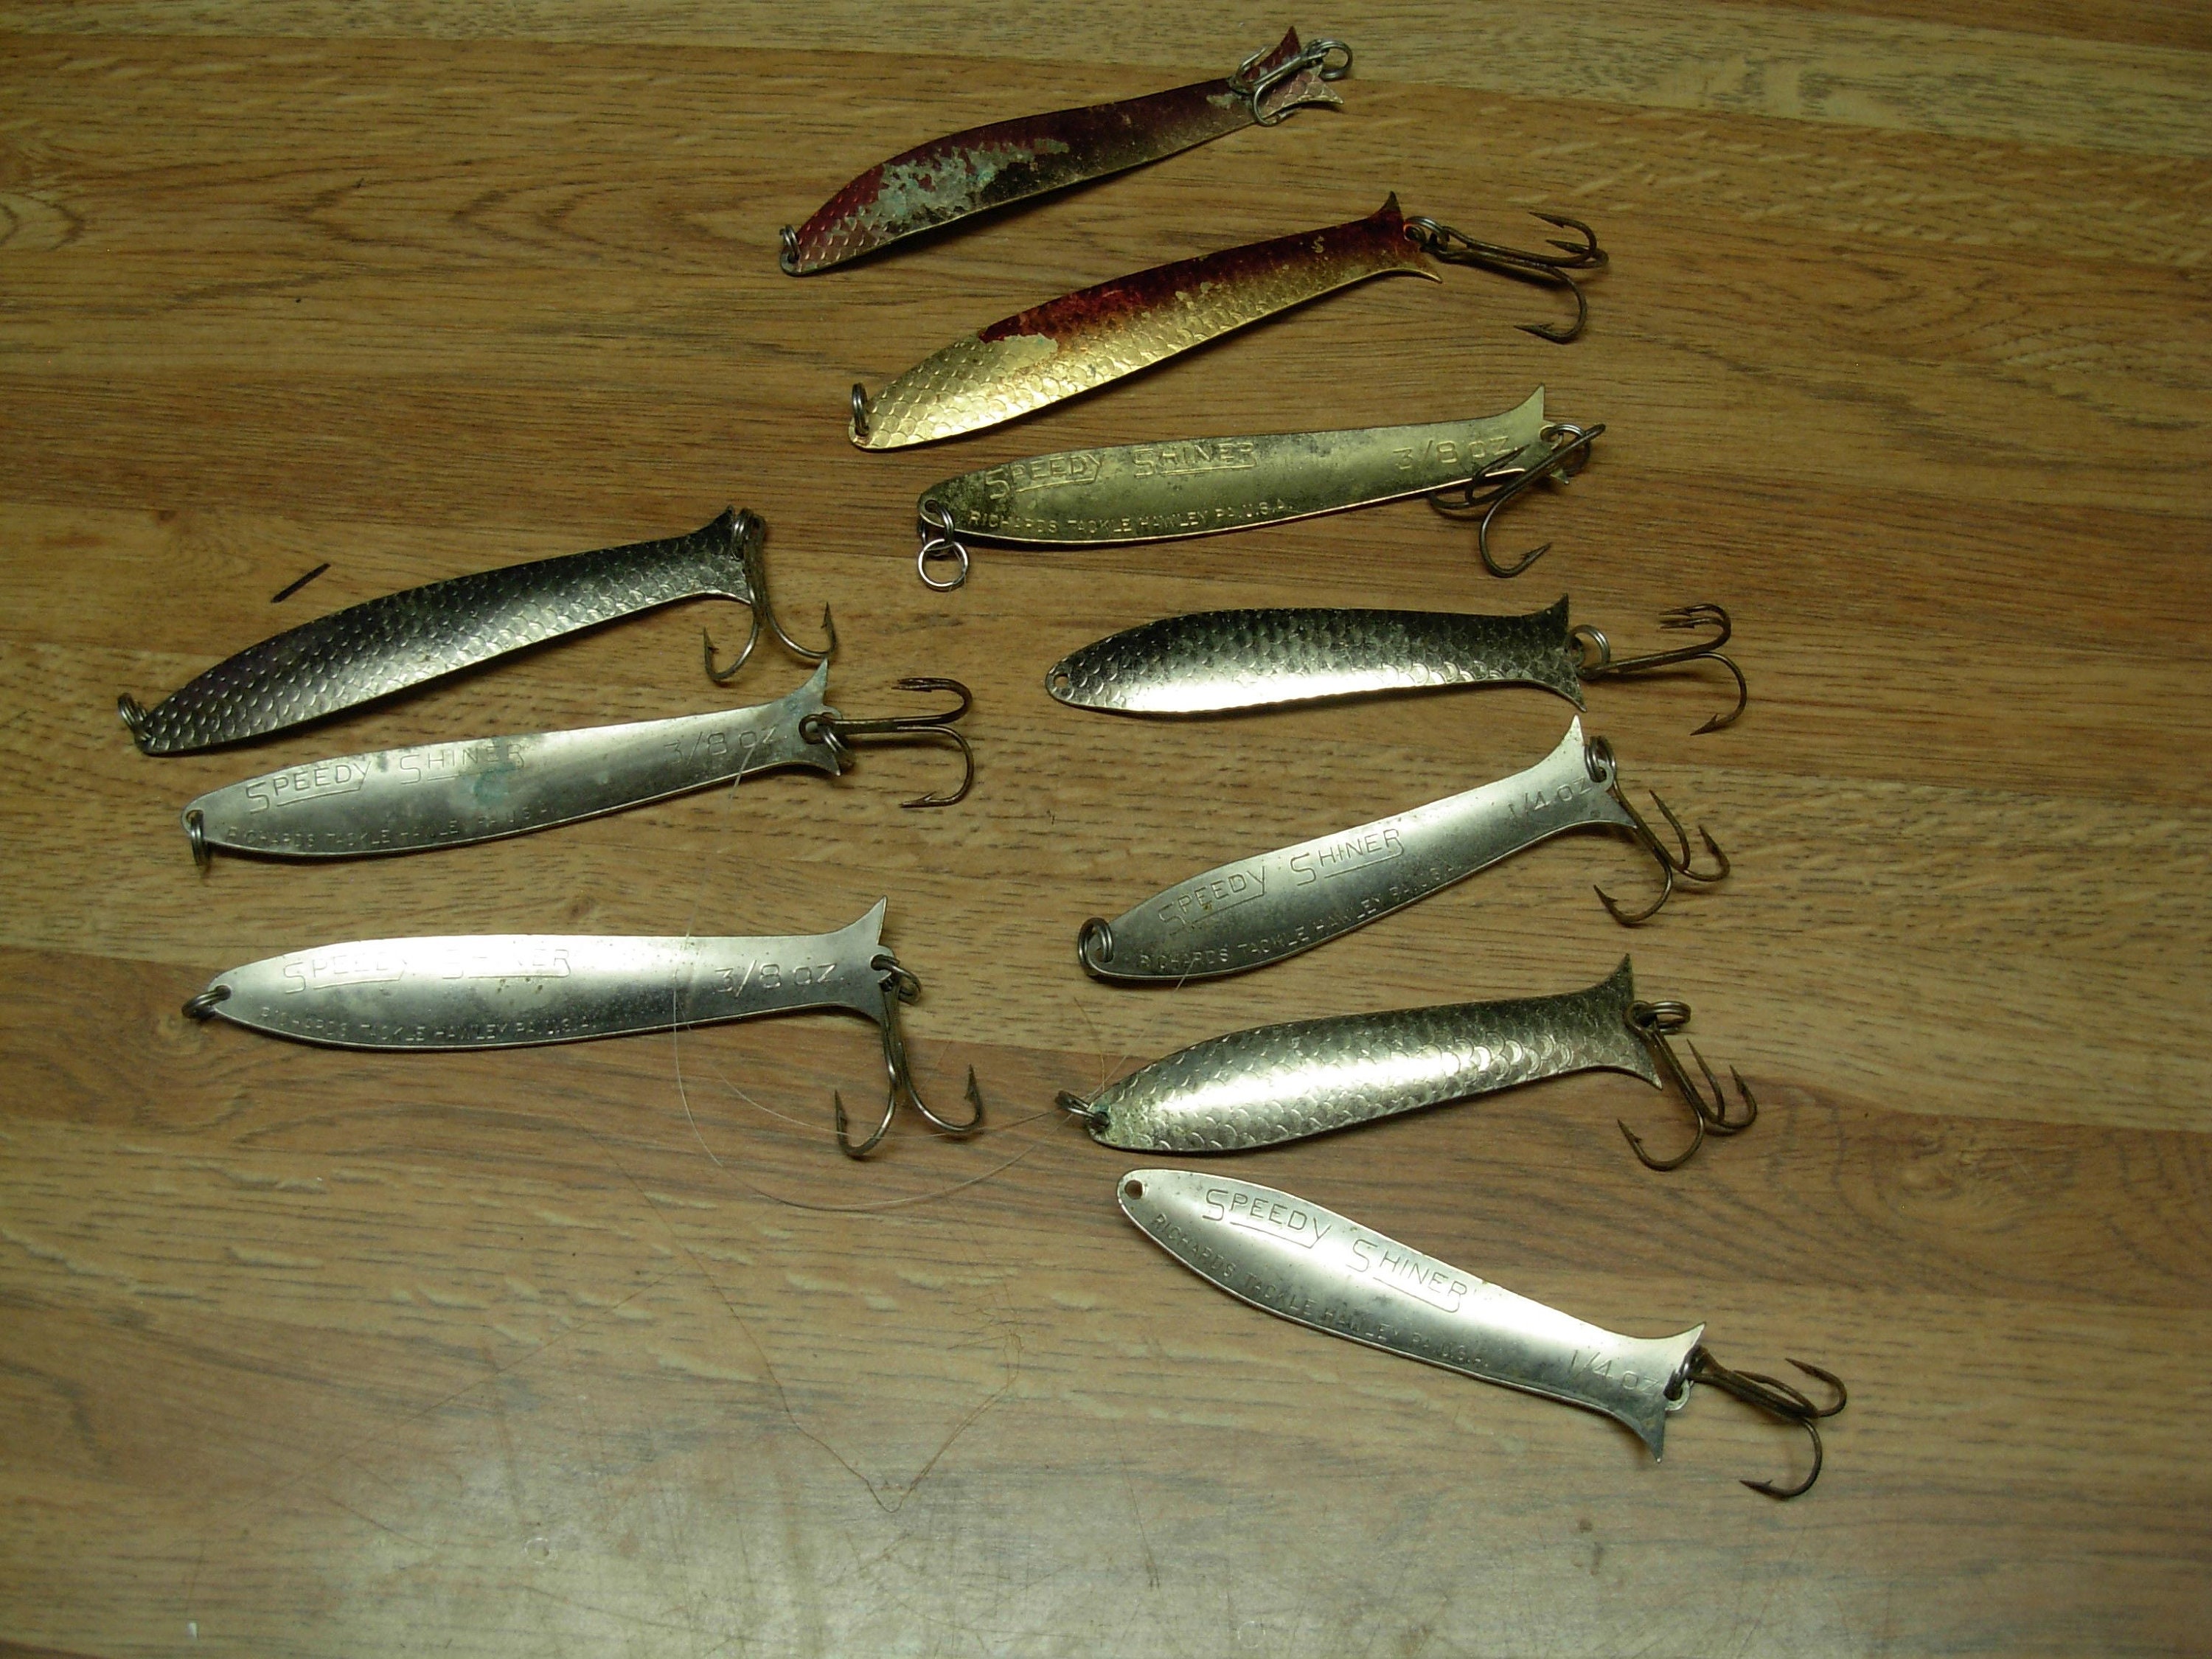 Vintage Fishing Tacke Speedy Shiner Spoon Lures From Richard's Tackle  Hawley PA LOT of 10 -  Norway